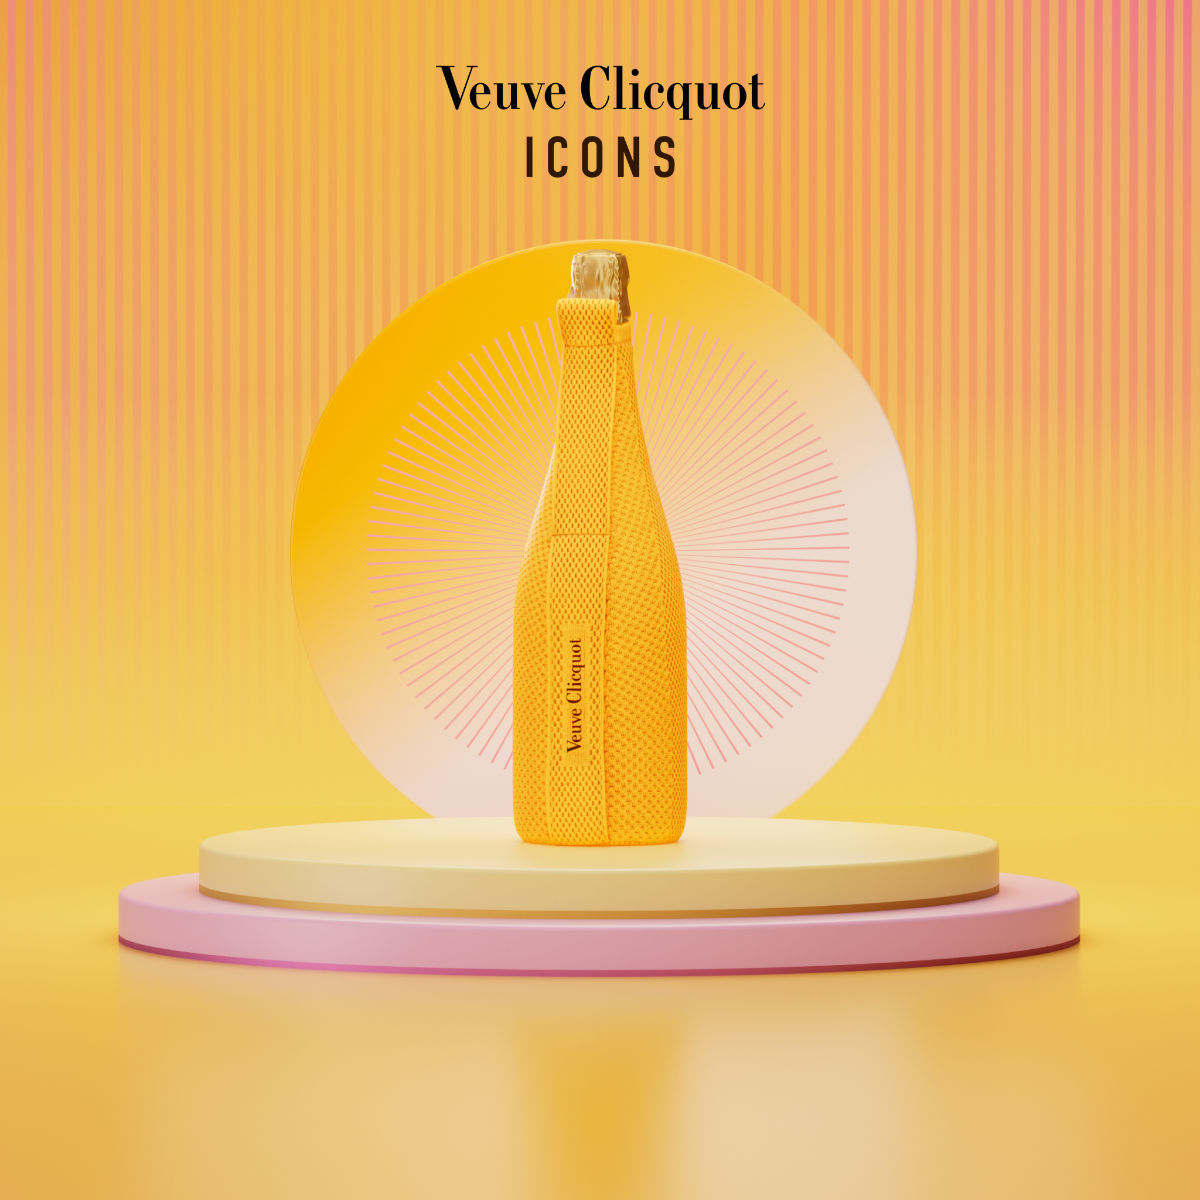 Veuve Clicquot Unveiled “THE ICONS”: An Exclusive Collection Of Four Of The House’s Most Emblematic